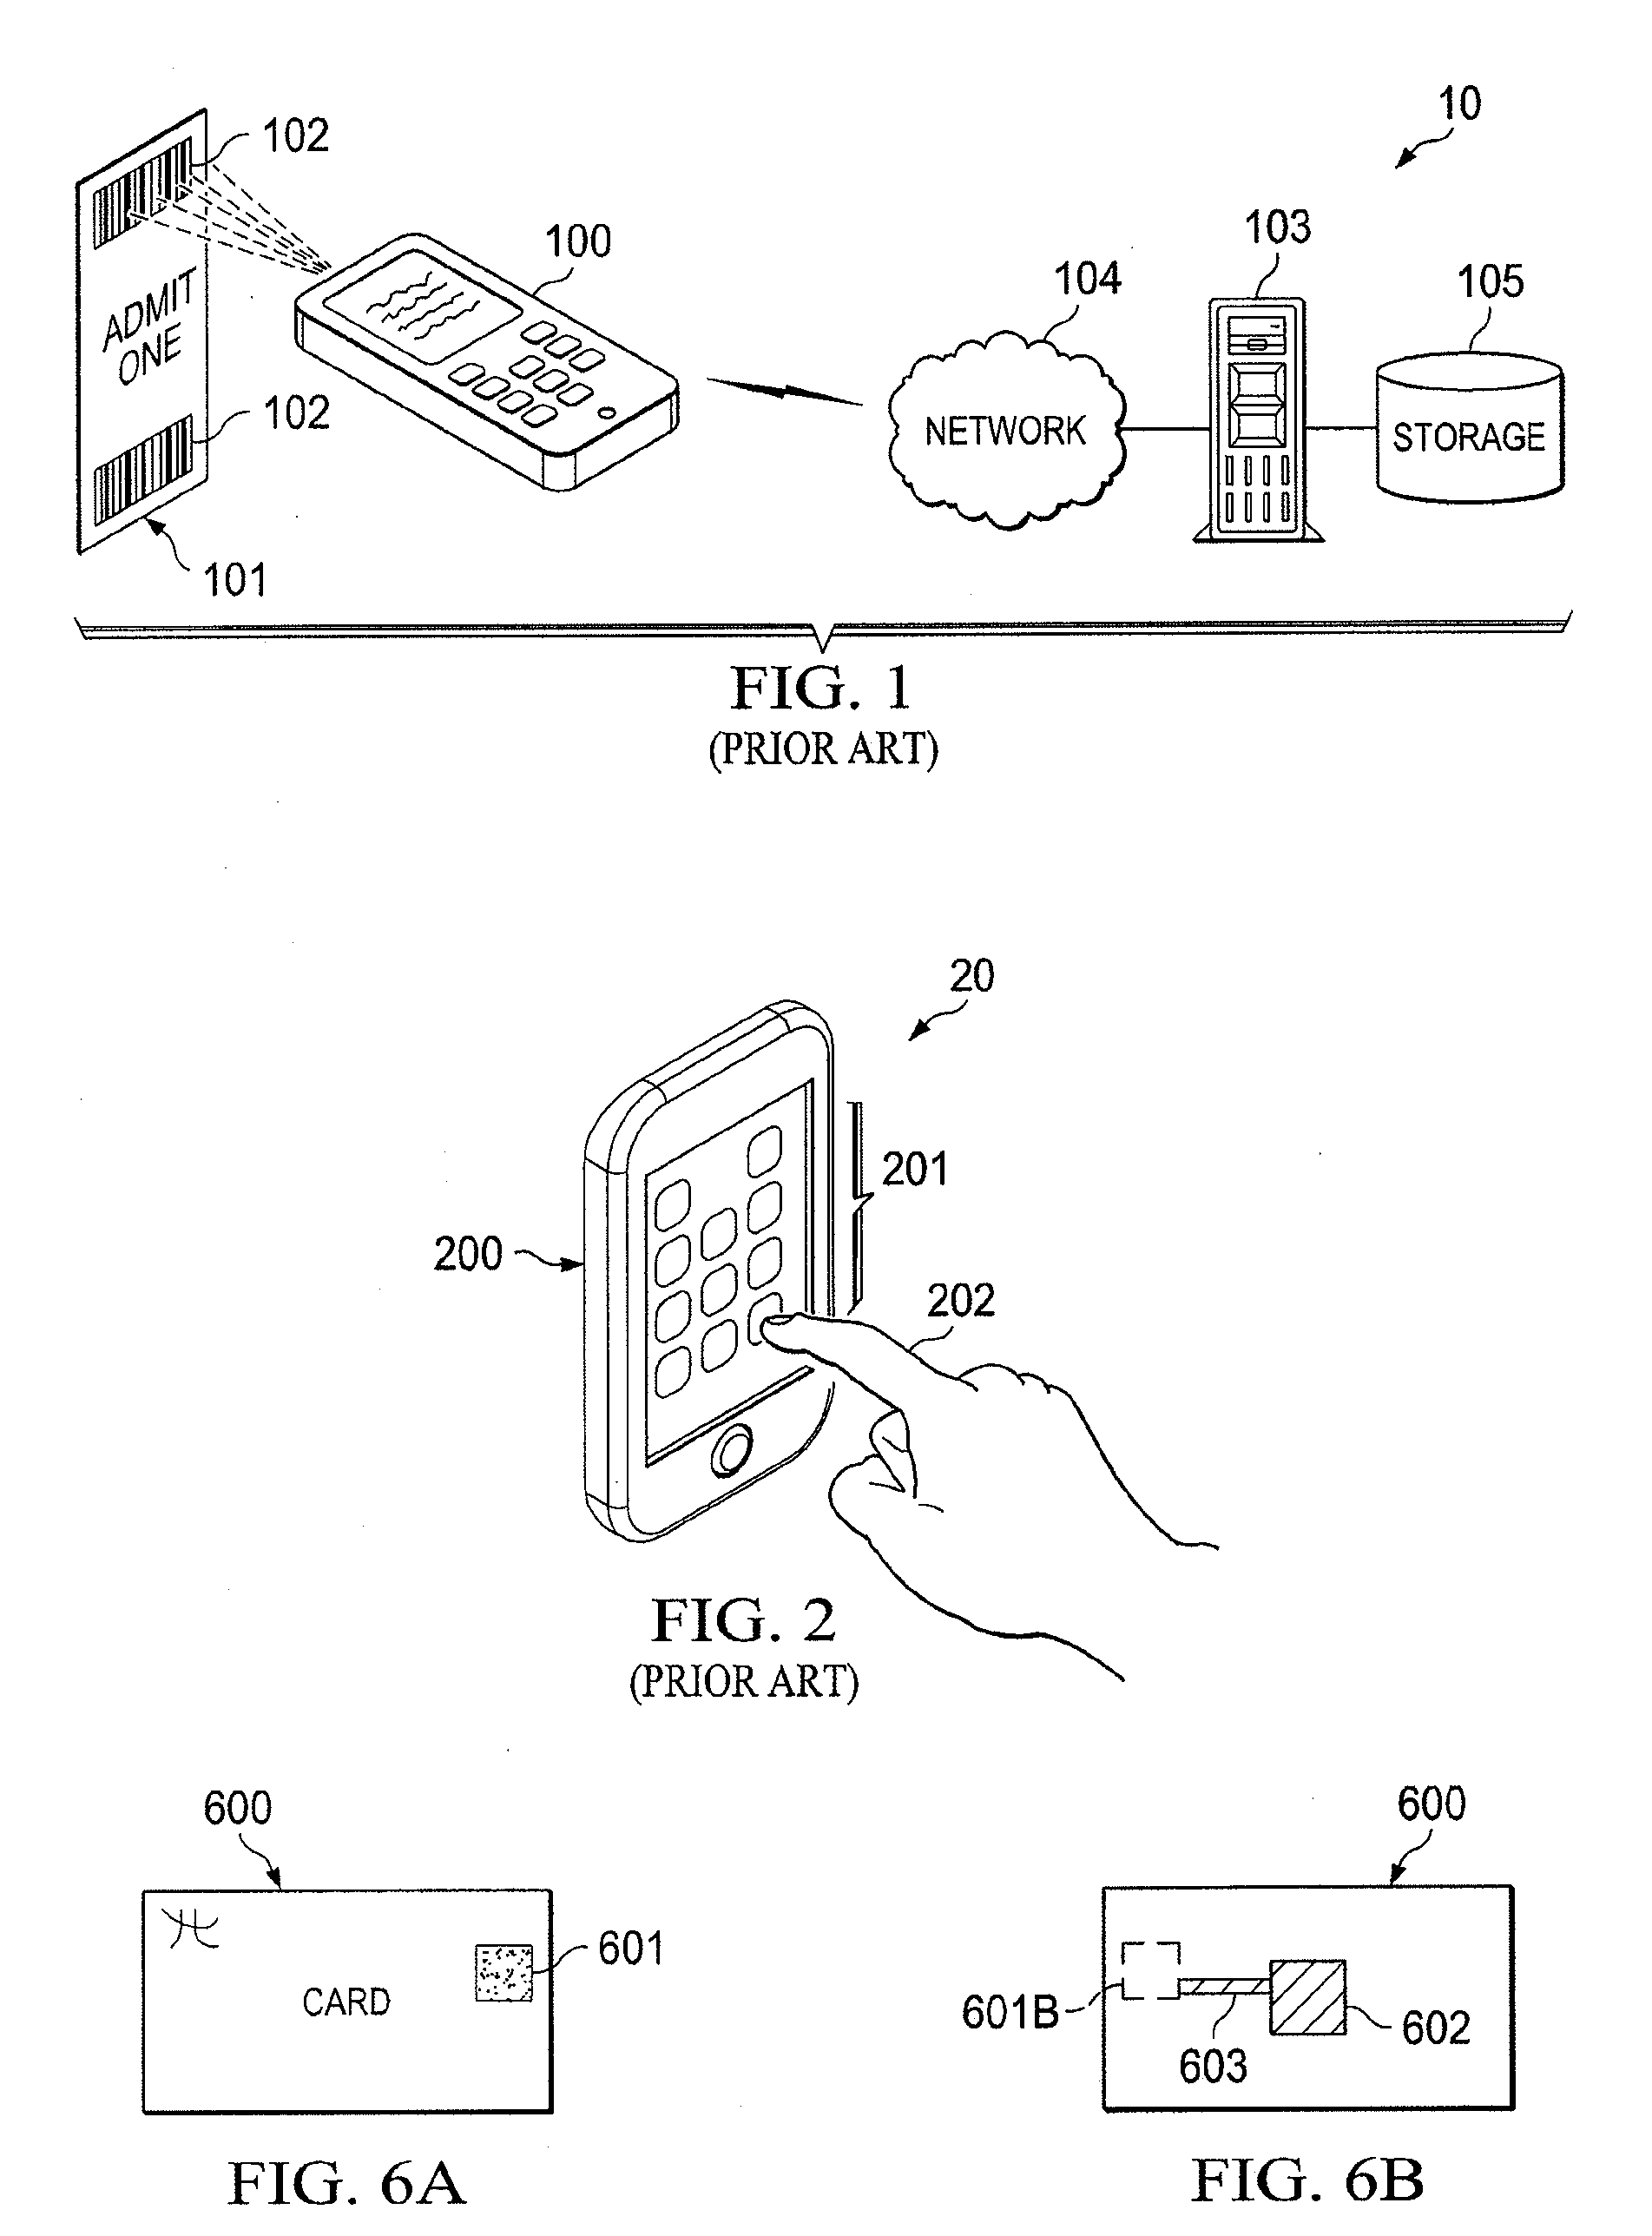 Surface scanning with a capacitive touch screen